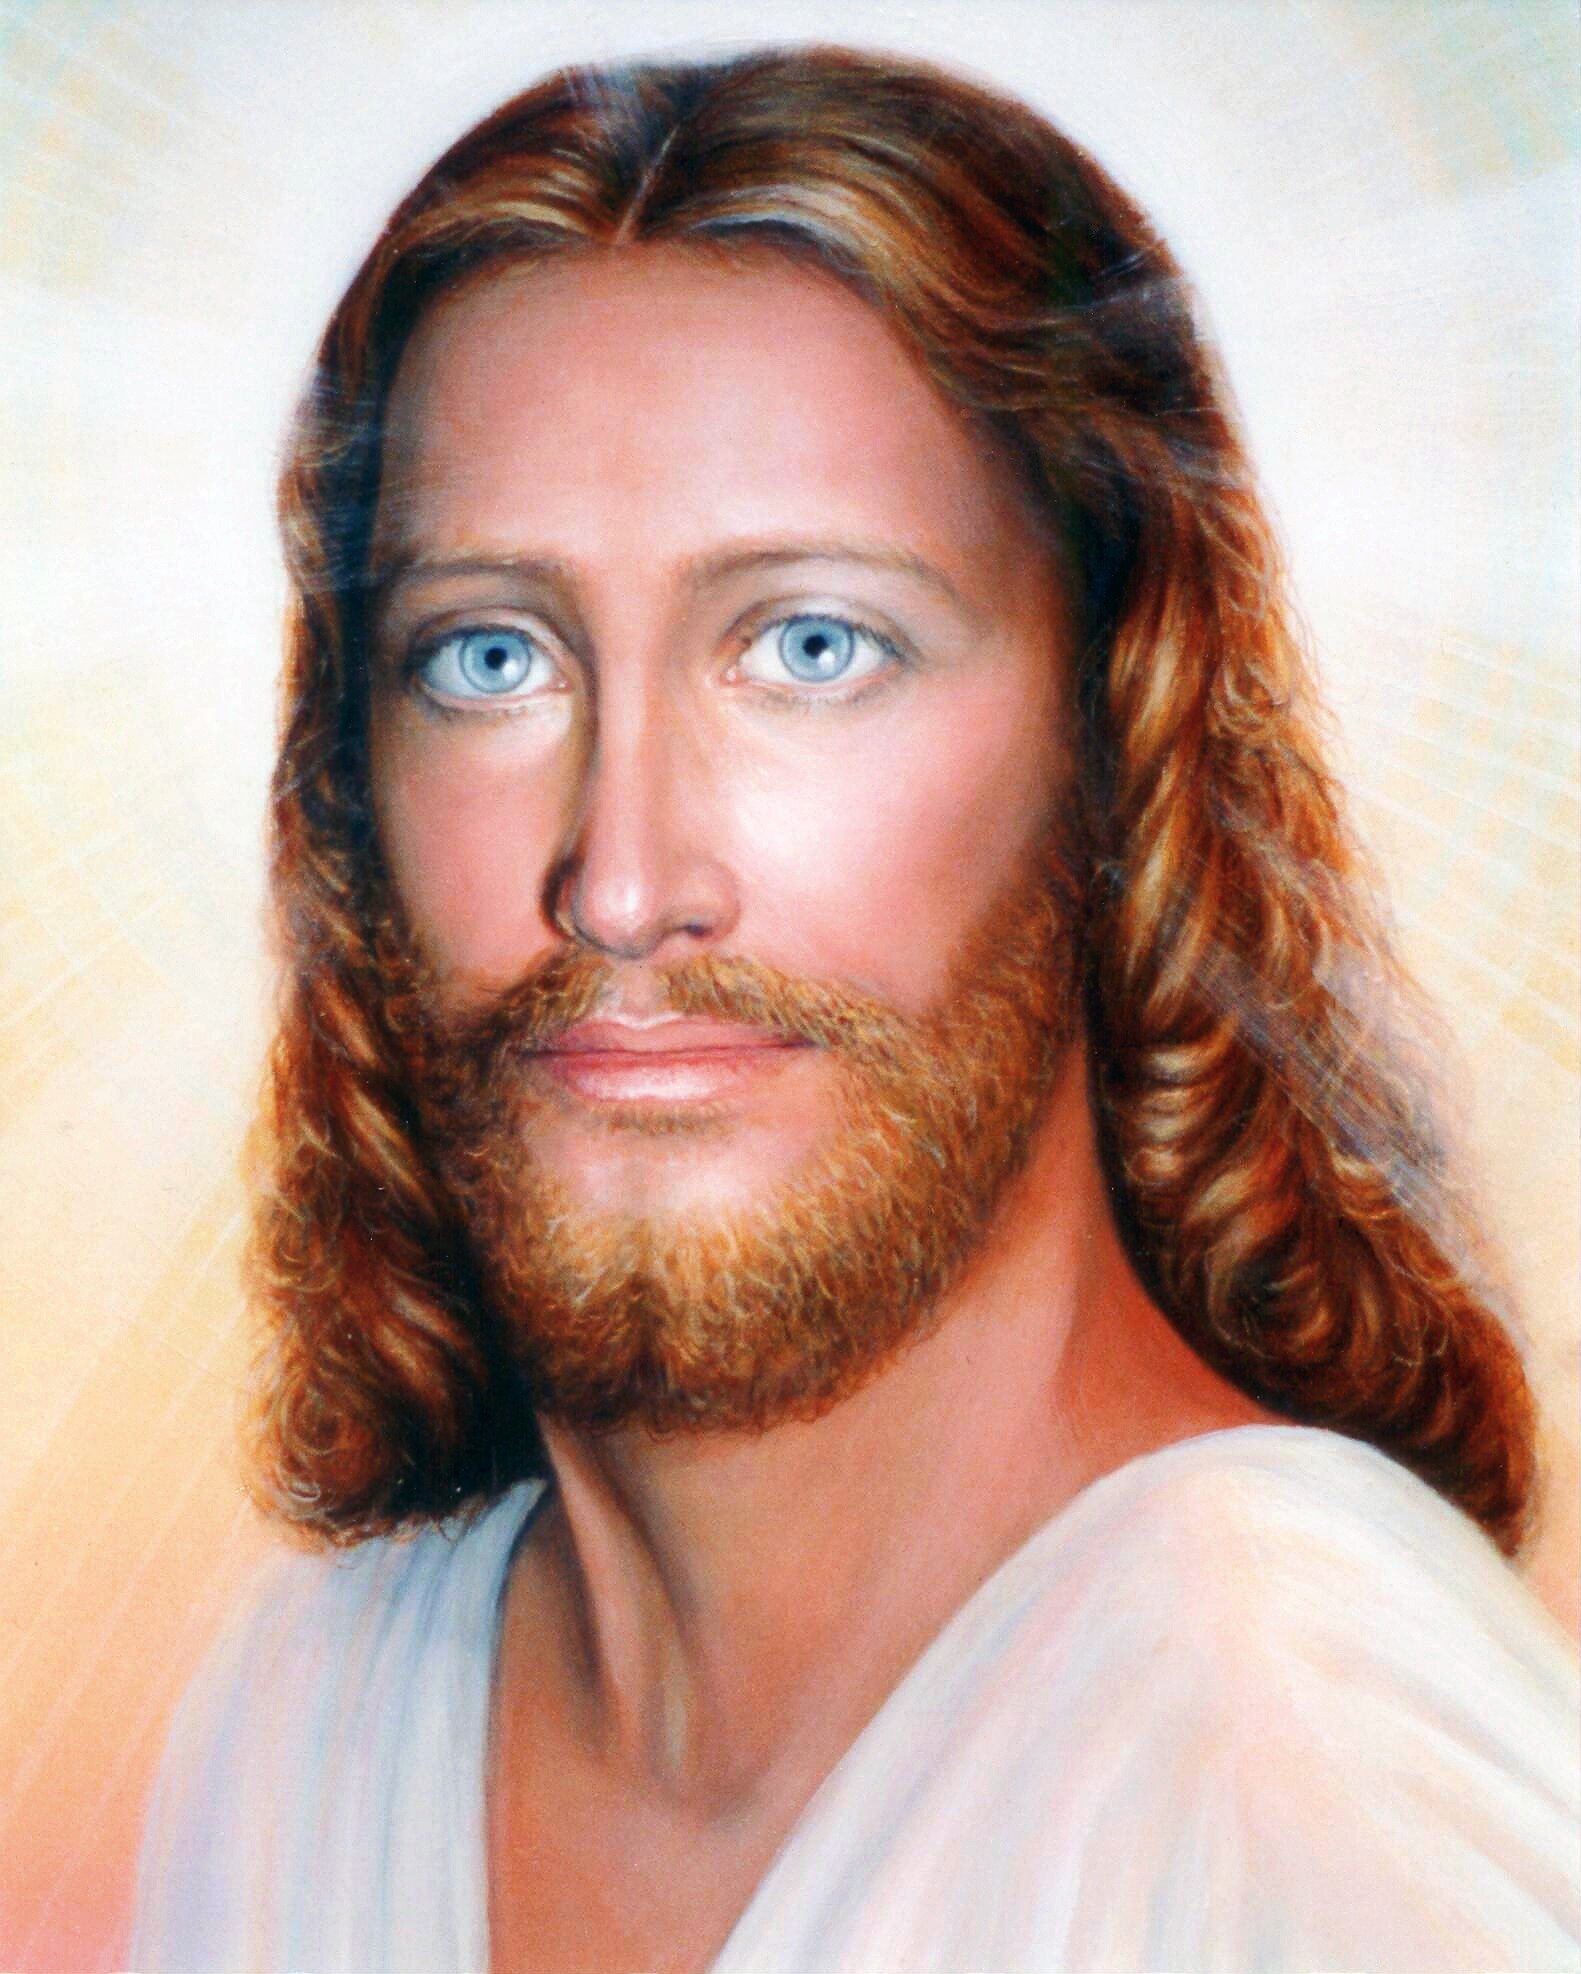 Lord Sananda's Redemption Prayer for 2012